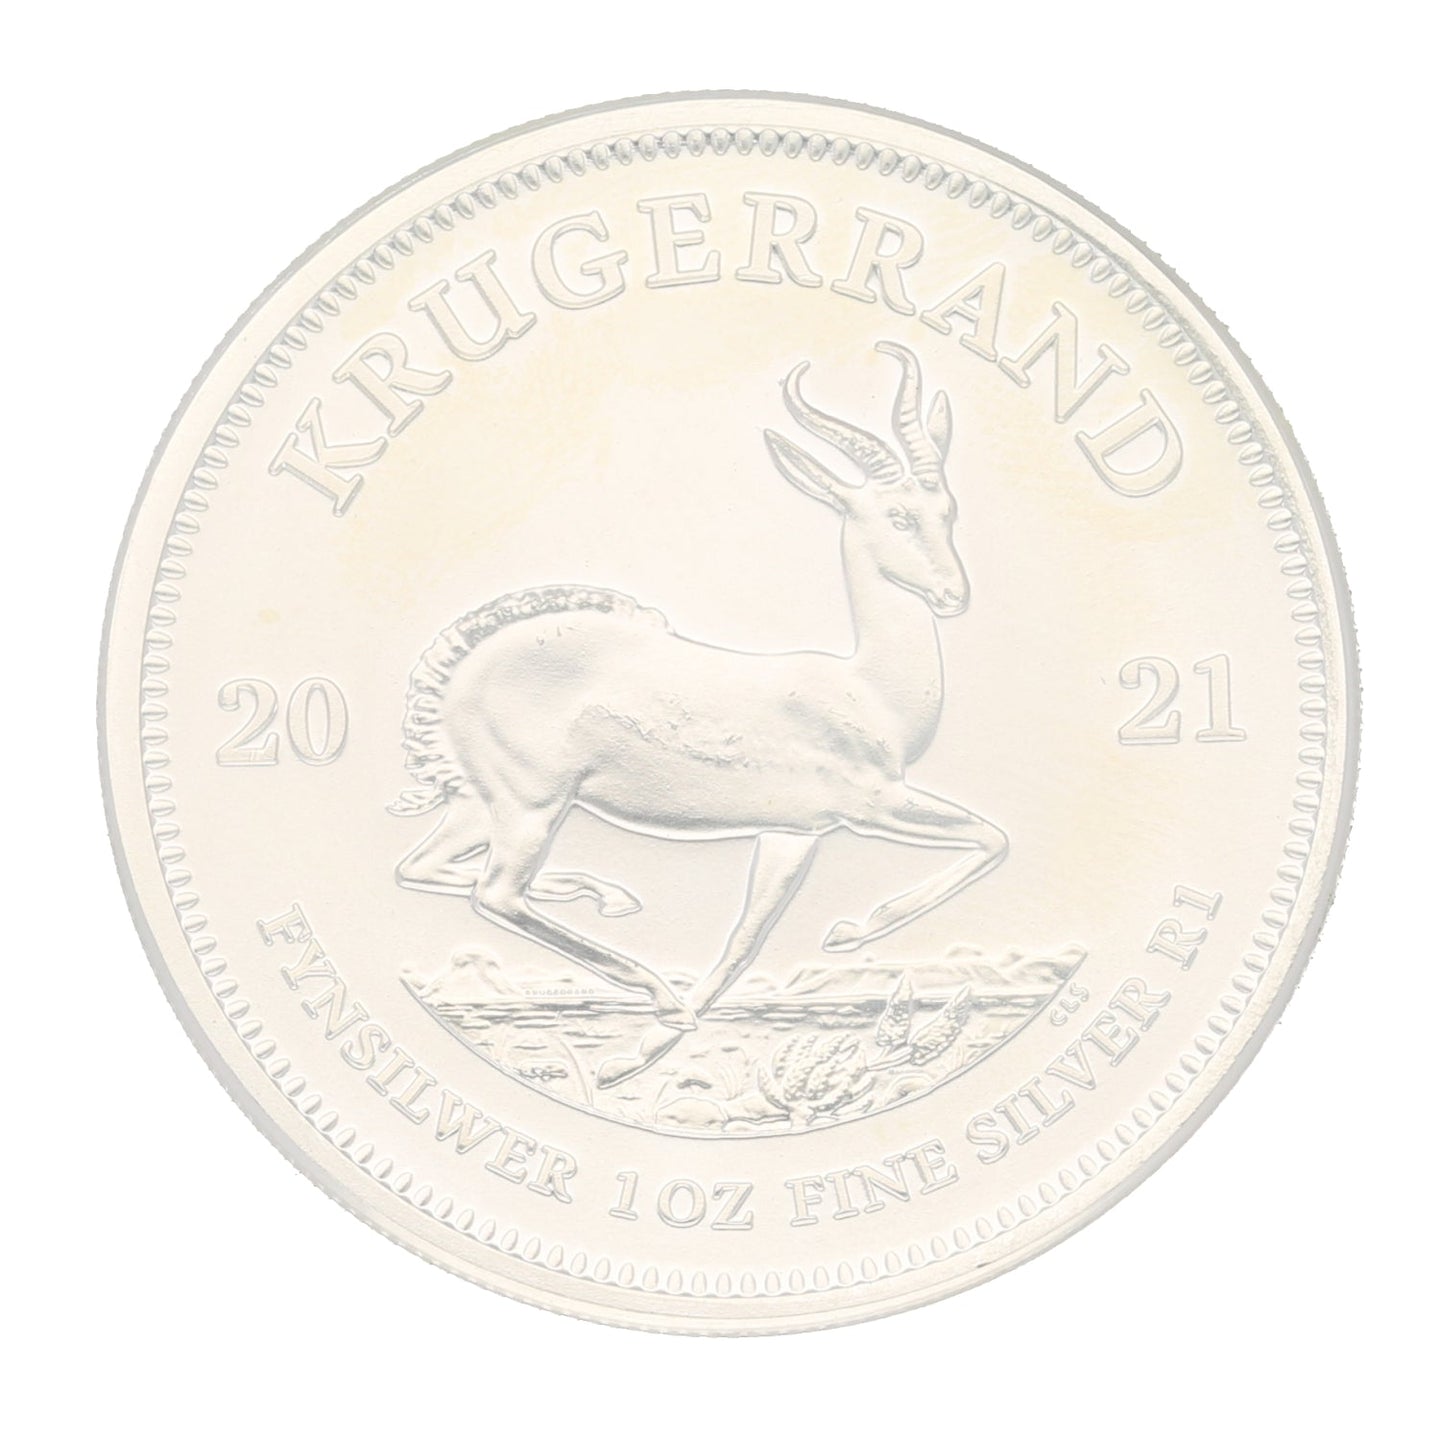 New Silver Sterling Full Krugerrand Coin 2021